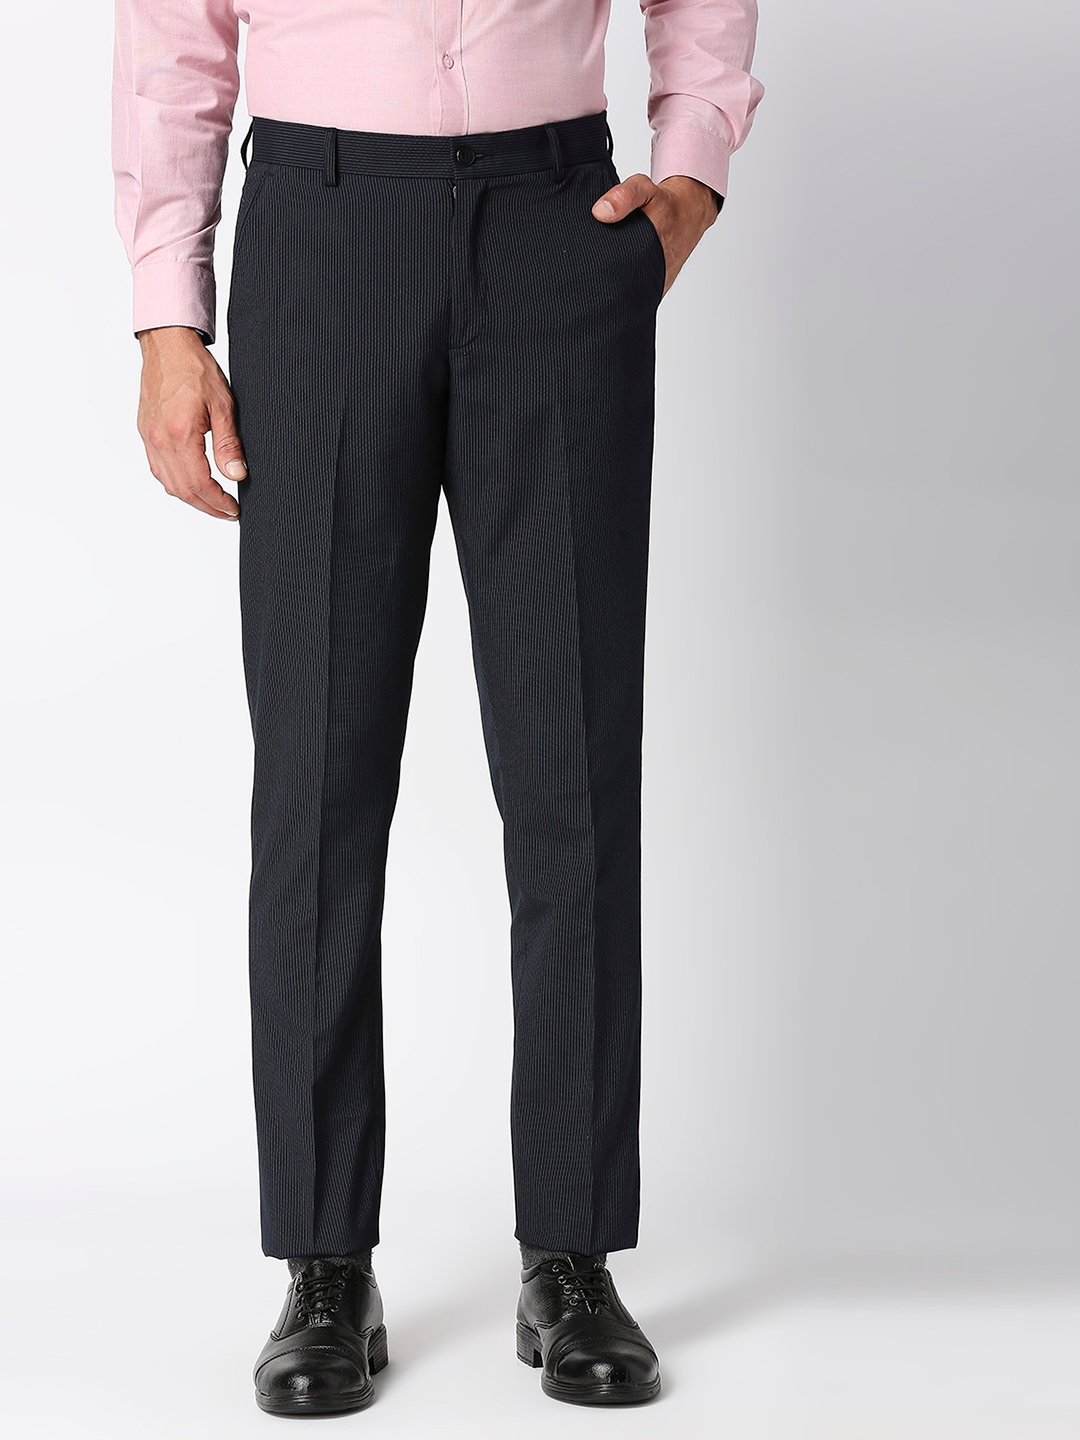 Men's Black Polyester Striped Formal Trousers